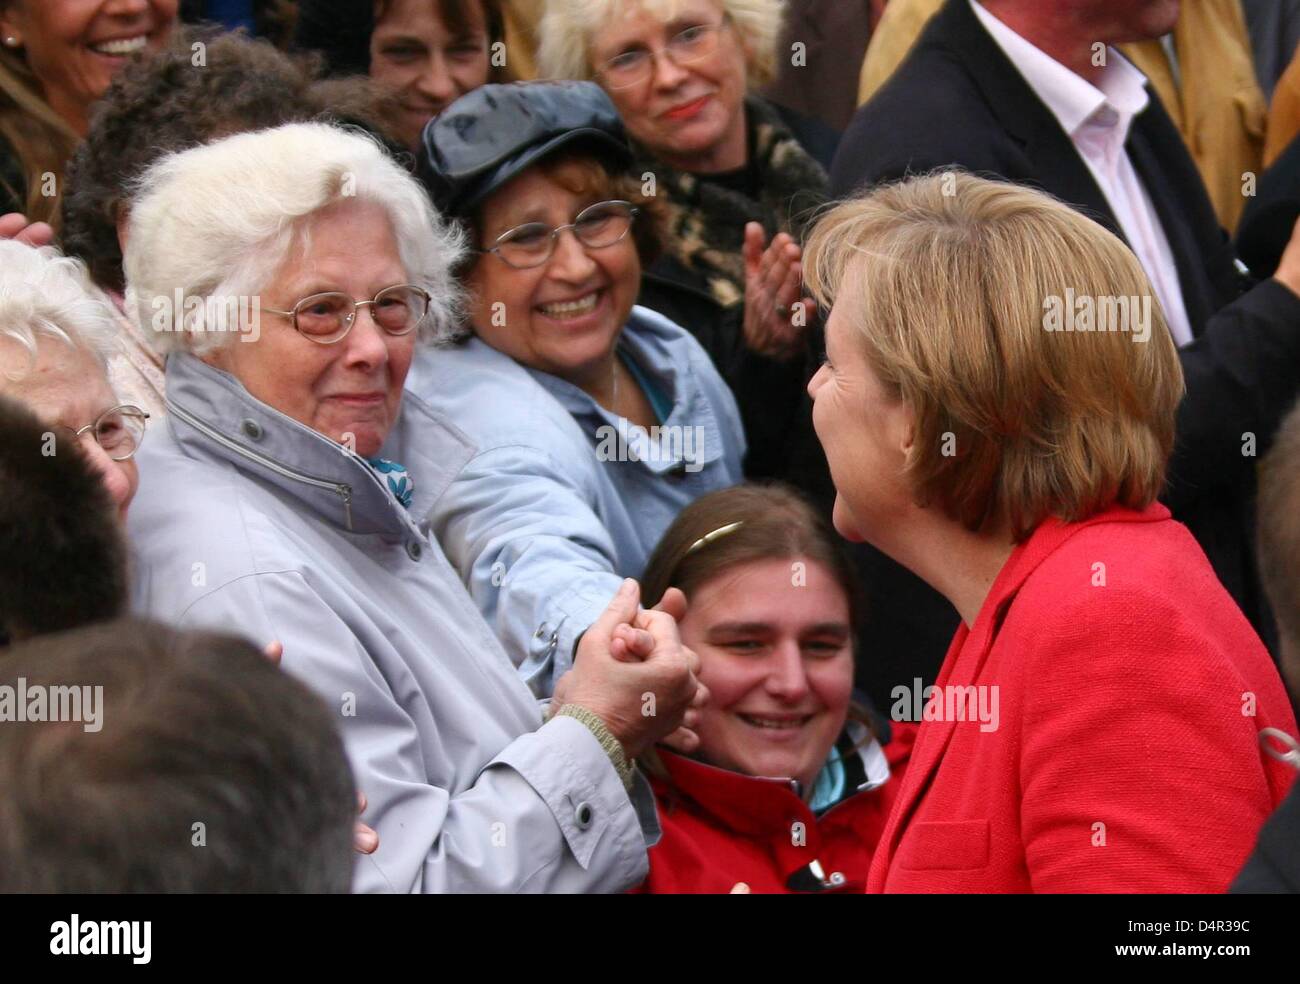 German Chancellor Angela Merkel of Christian Democratic Union (CDU) talks to citizens at an election campaign event in Heide, Germany, 22 September 2009. German federal elections and the elections for Schleswig Holstein?s state parliament are held on 27 September 2009. Photo: CARSTEN REHDER Stock Photo